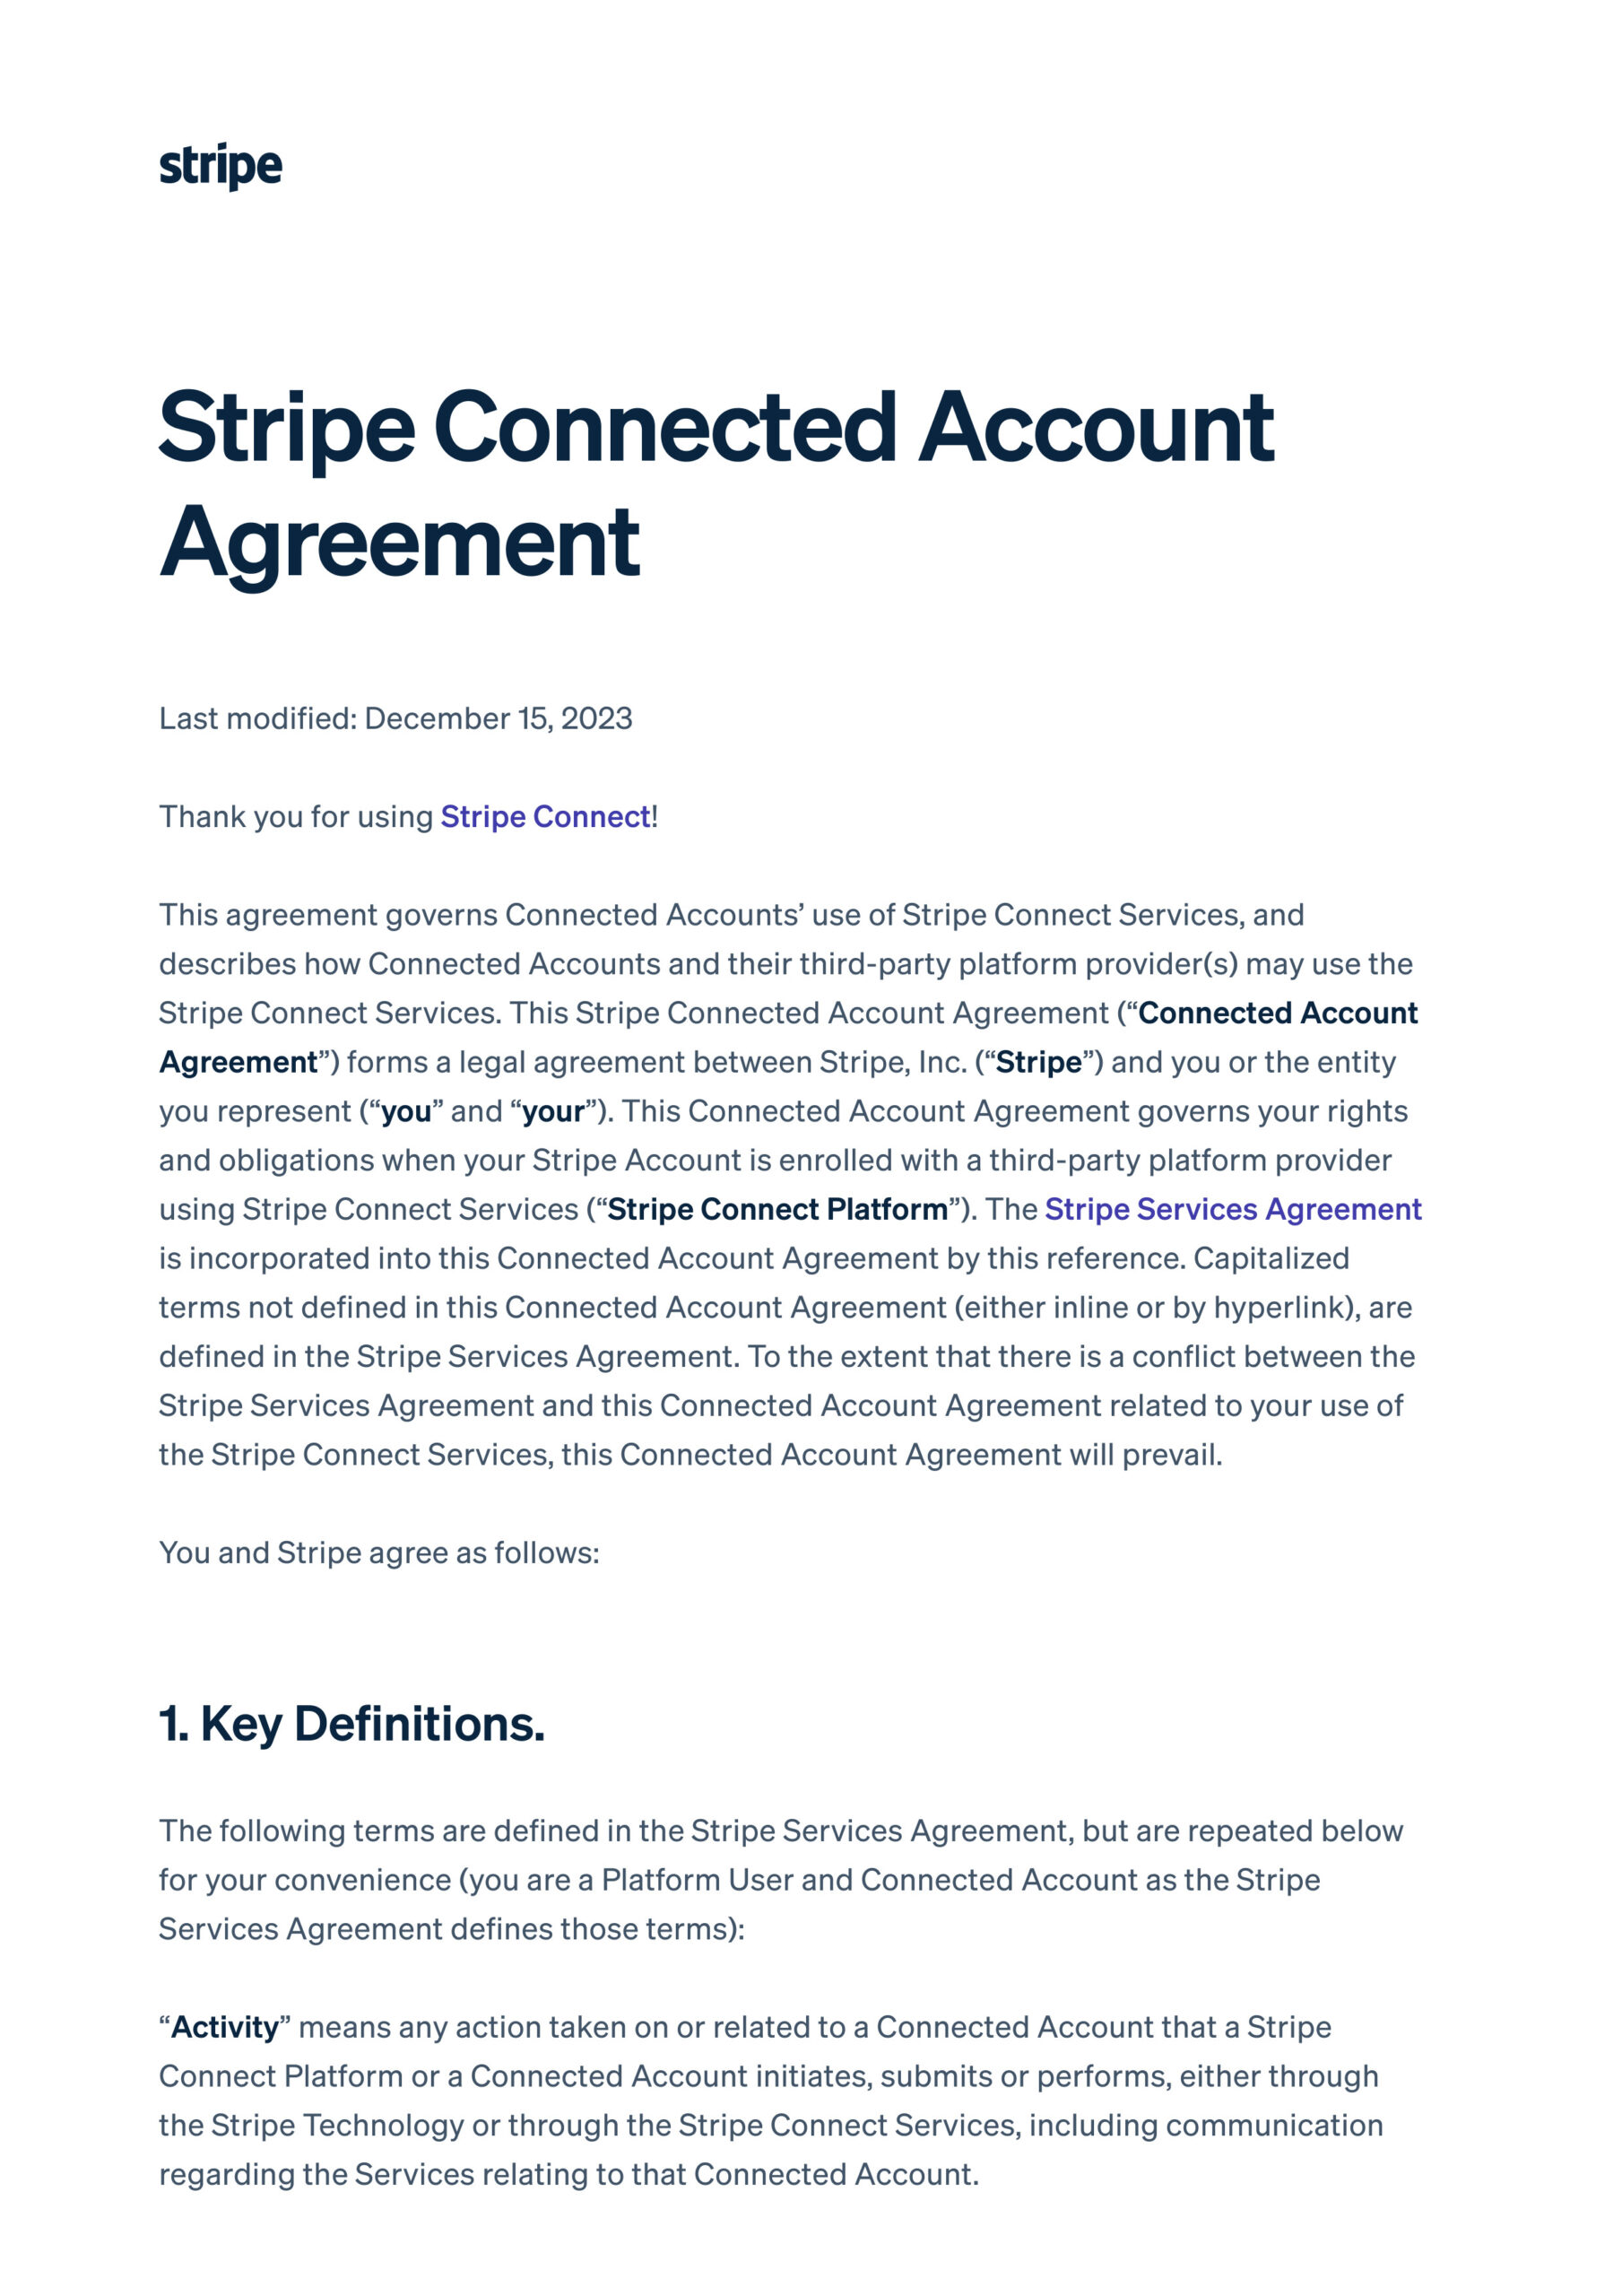 Screenshot of the first oage of StripeConnected Account Agreement